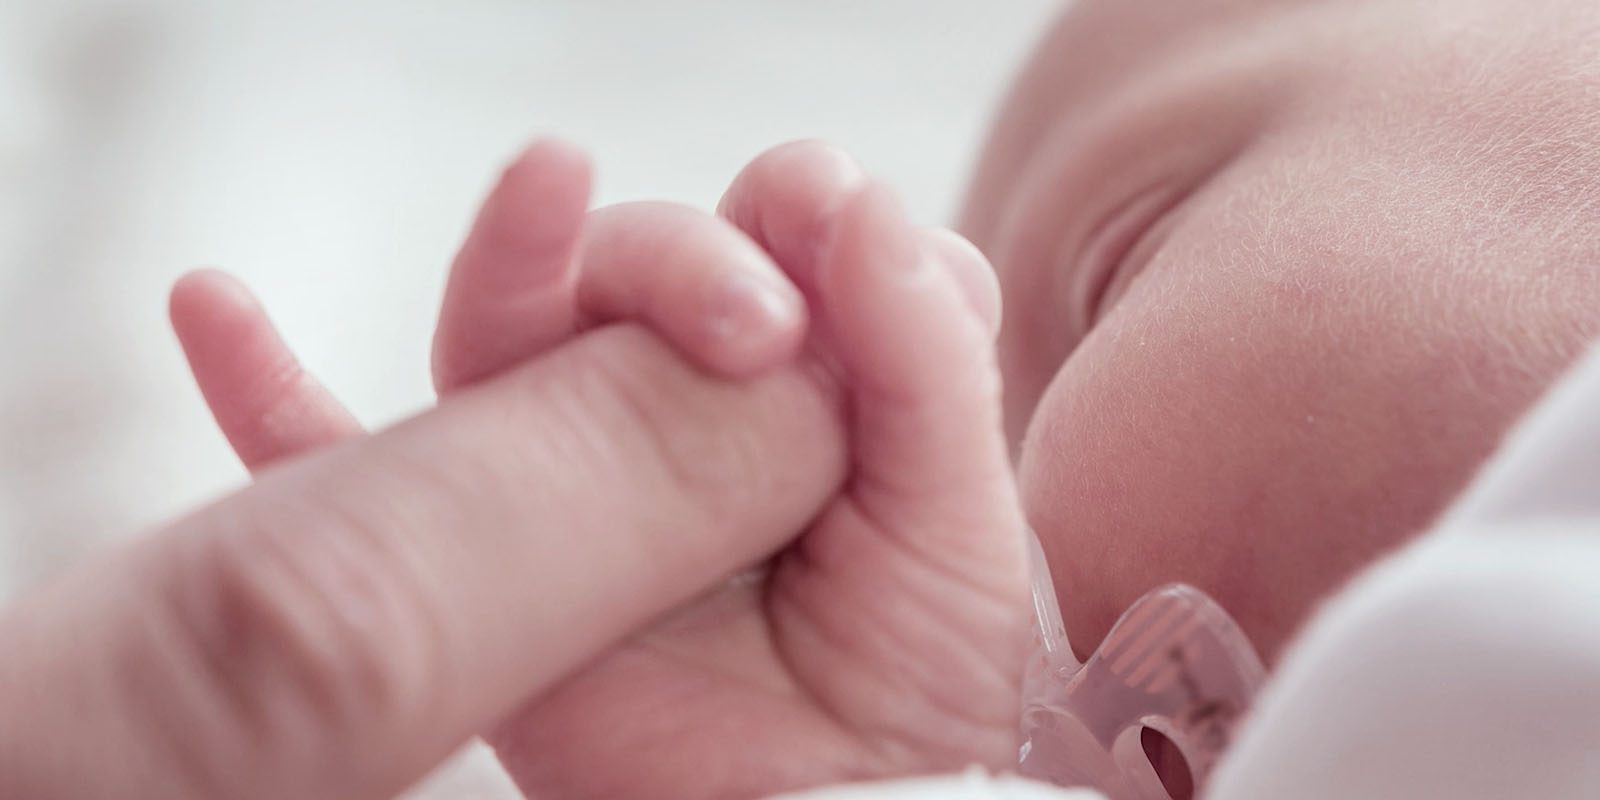 close-up of a newborn baby with its fingers wrapped around the finger of an adult